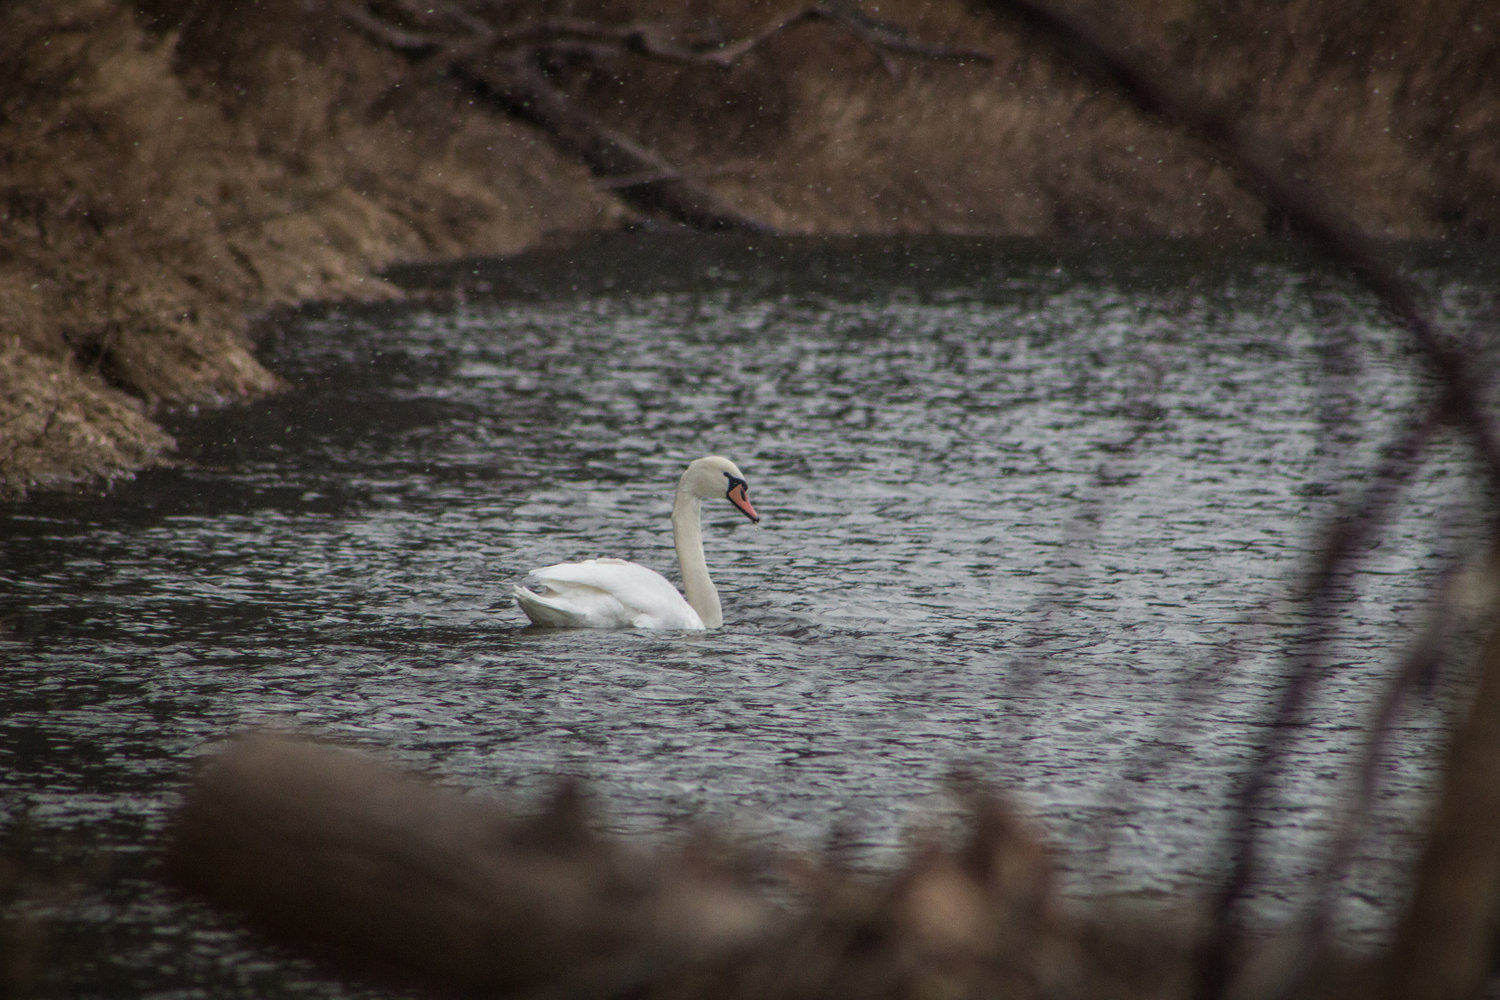 Stalk a swan in January when the weather is below zero? Sure... why not.